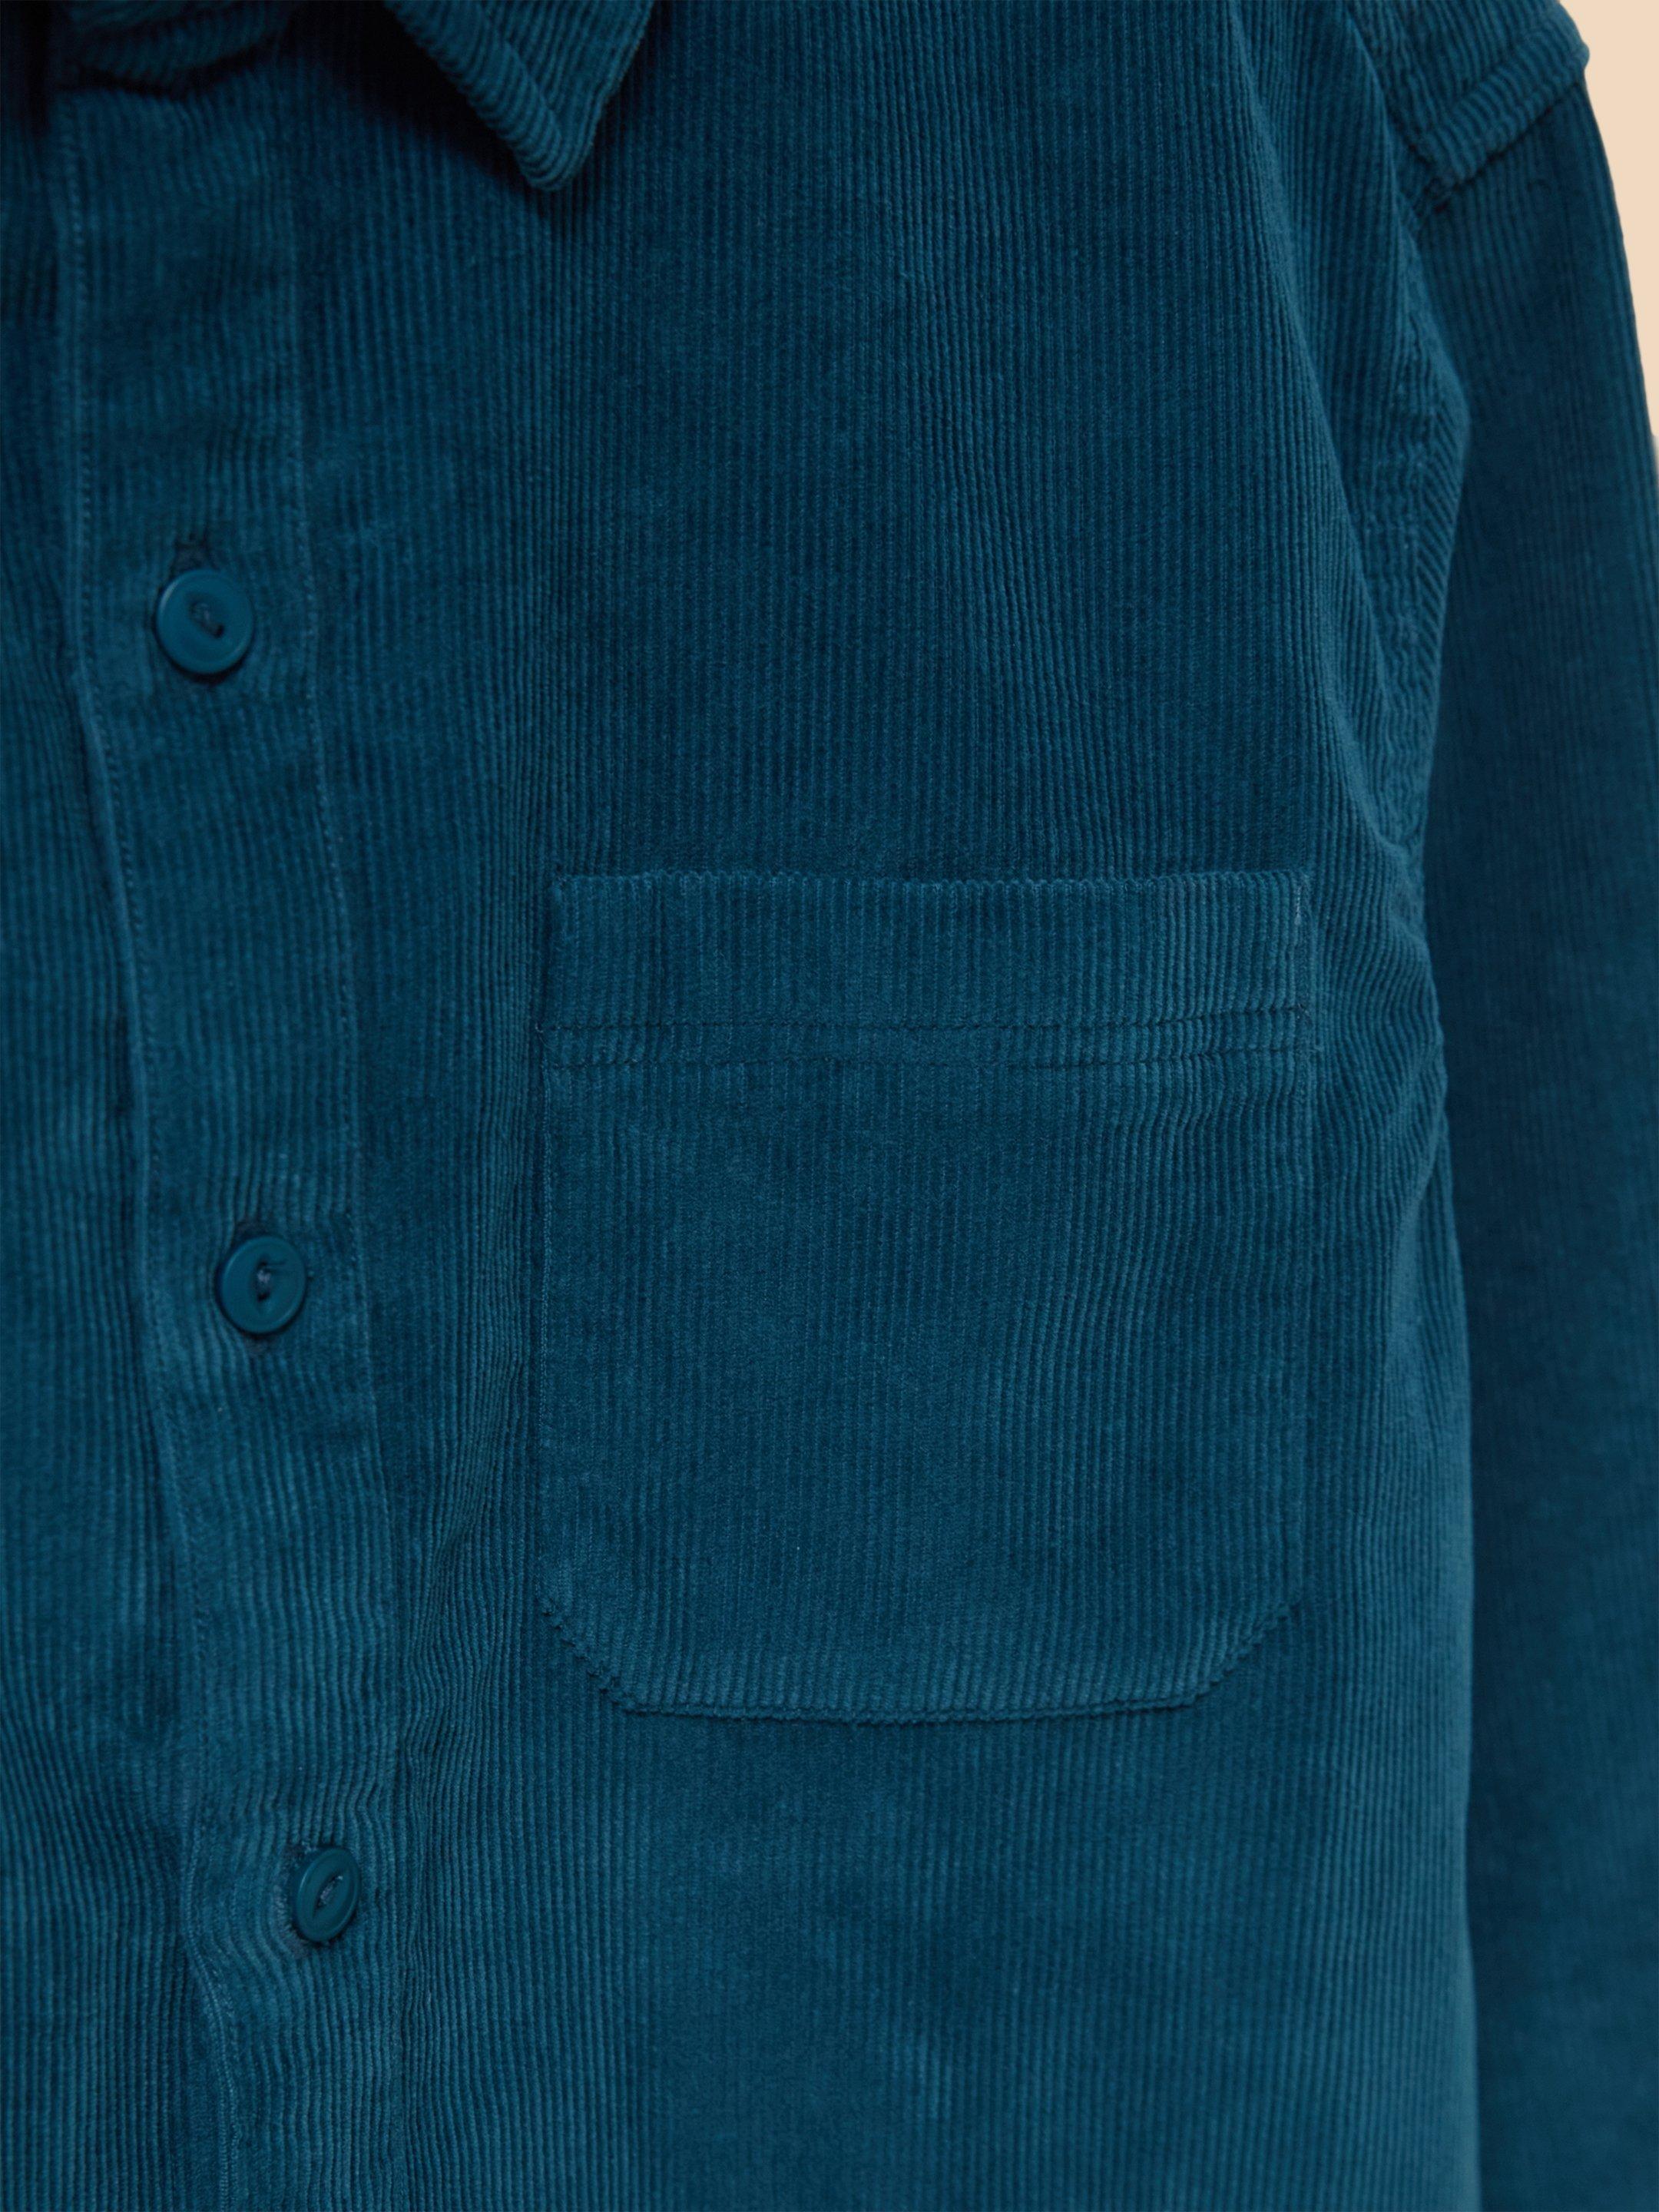 Whitwick Cord Shirt in MID TEAL - FLAT DETAIL